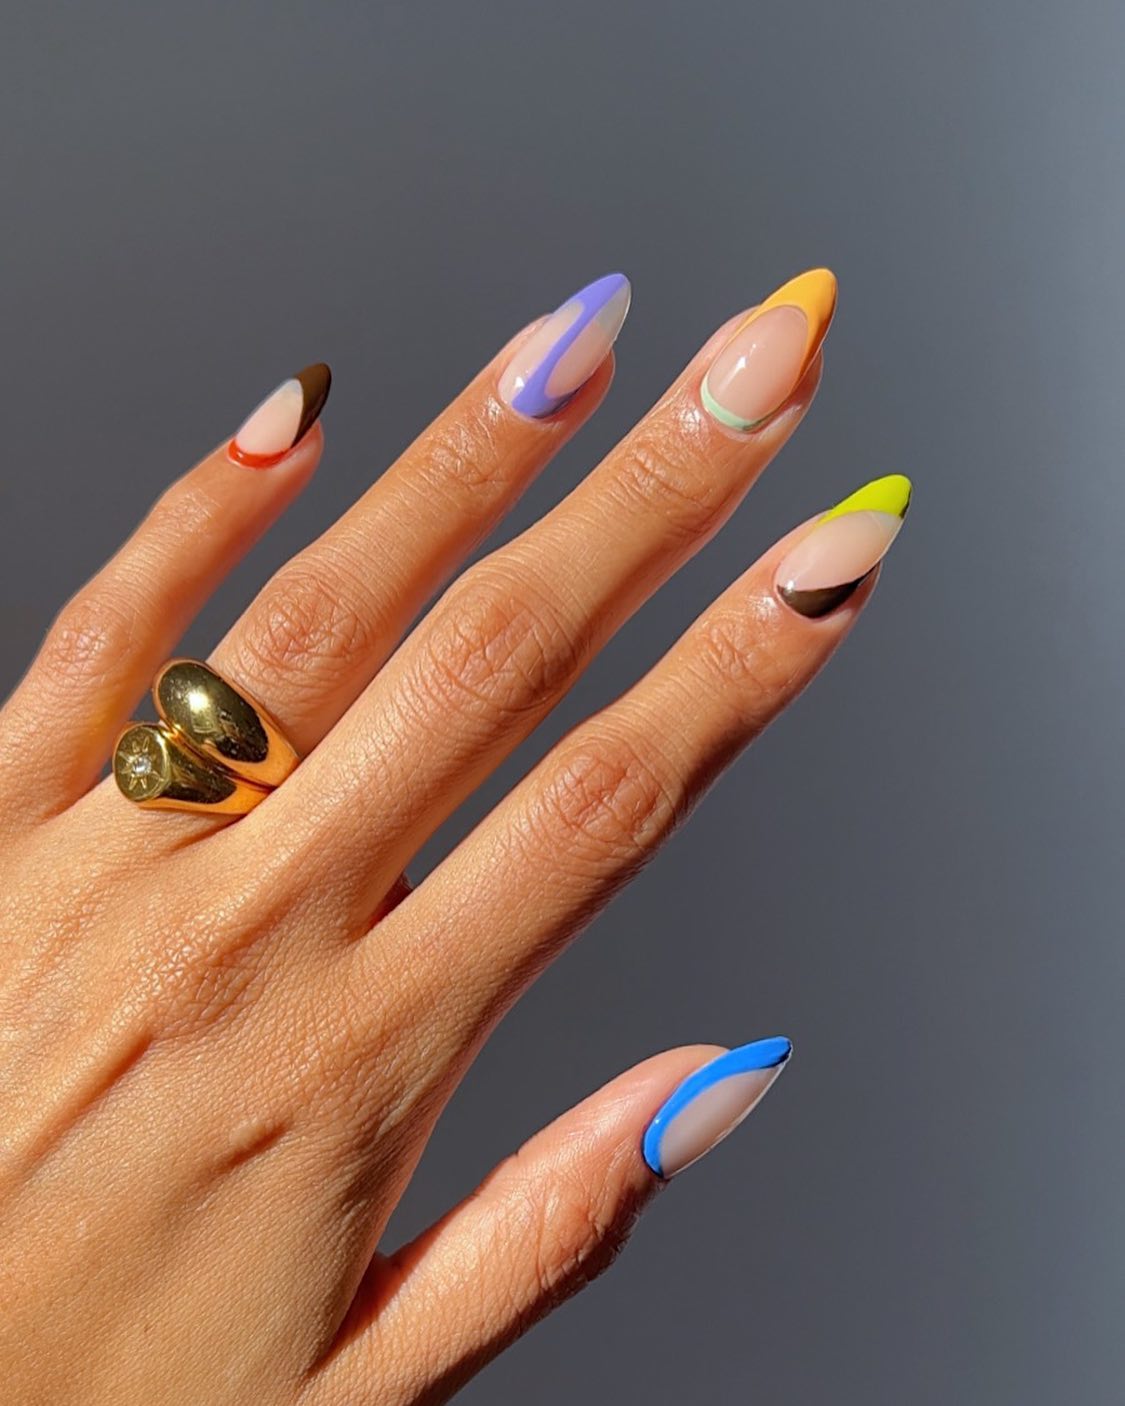 Rainbow nails with abstract design